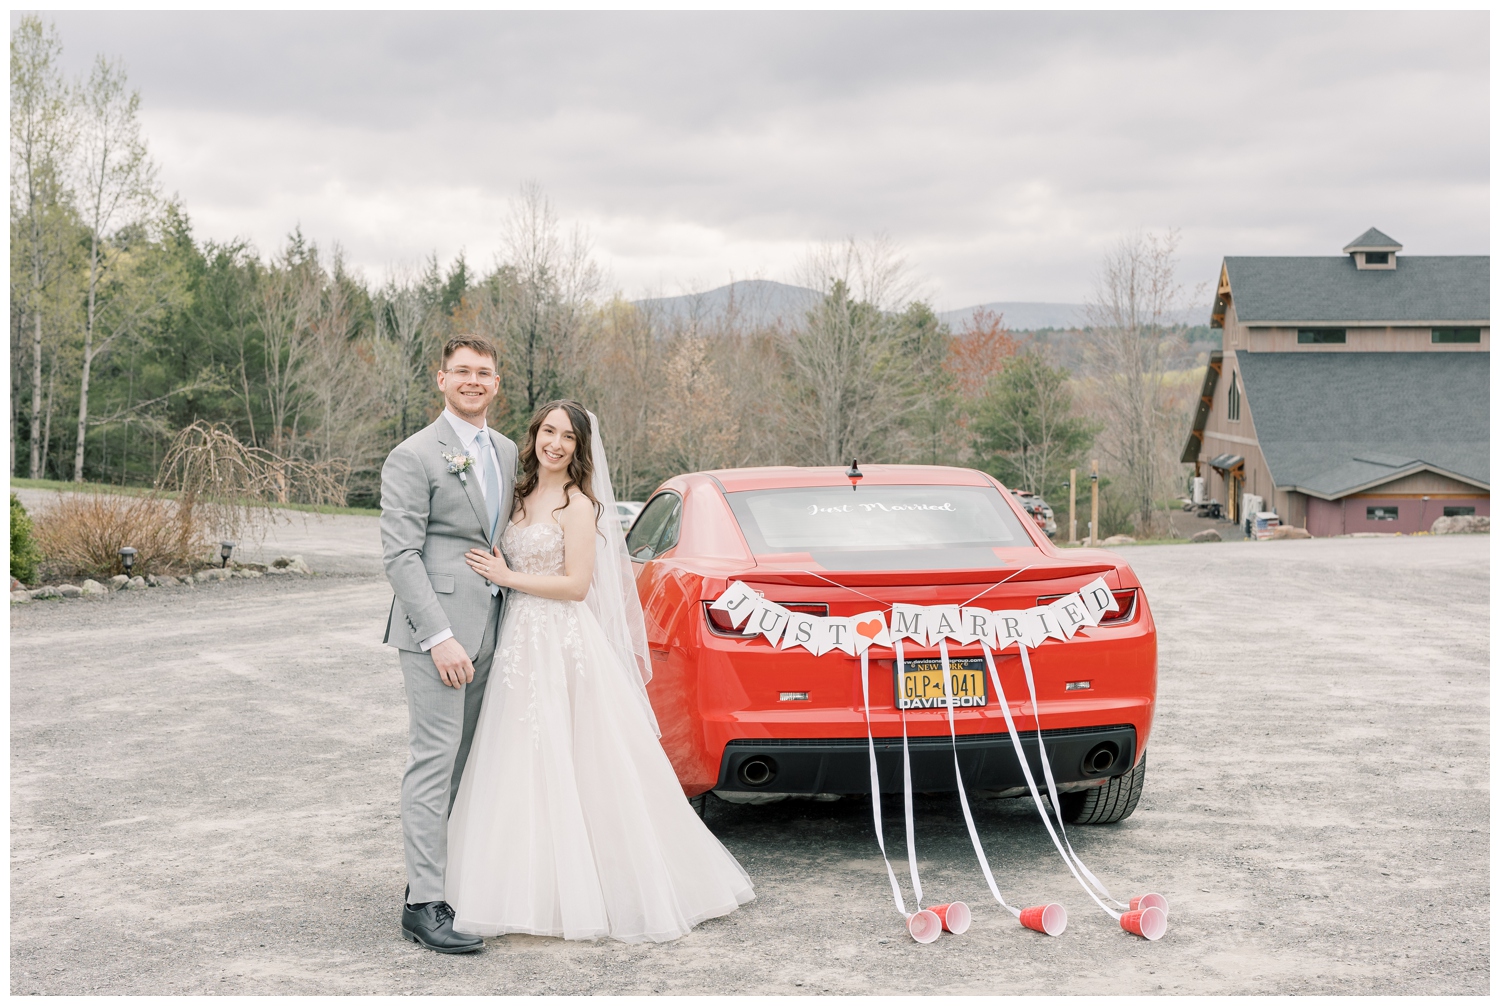 Bride and Groom standing next to their getaway car after getting married in the Enchanted Forest at Windham Manor.
